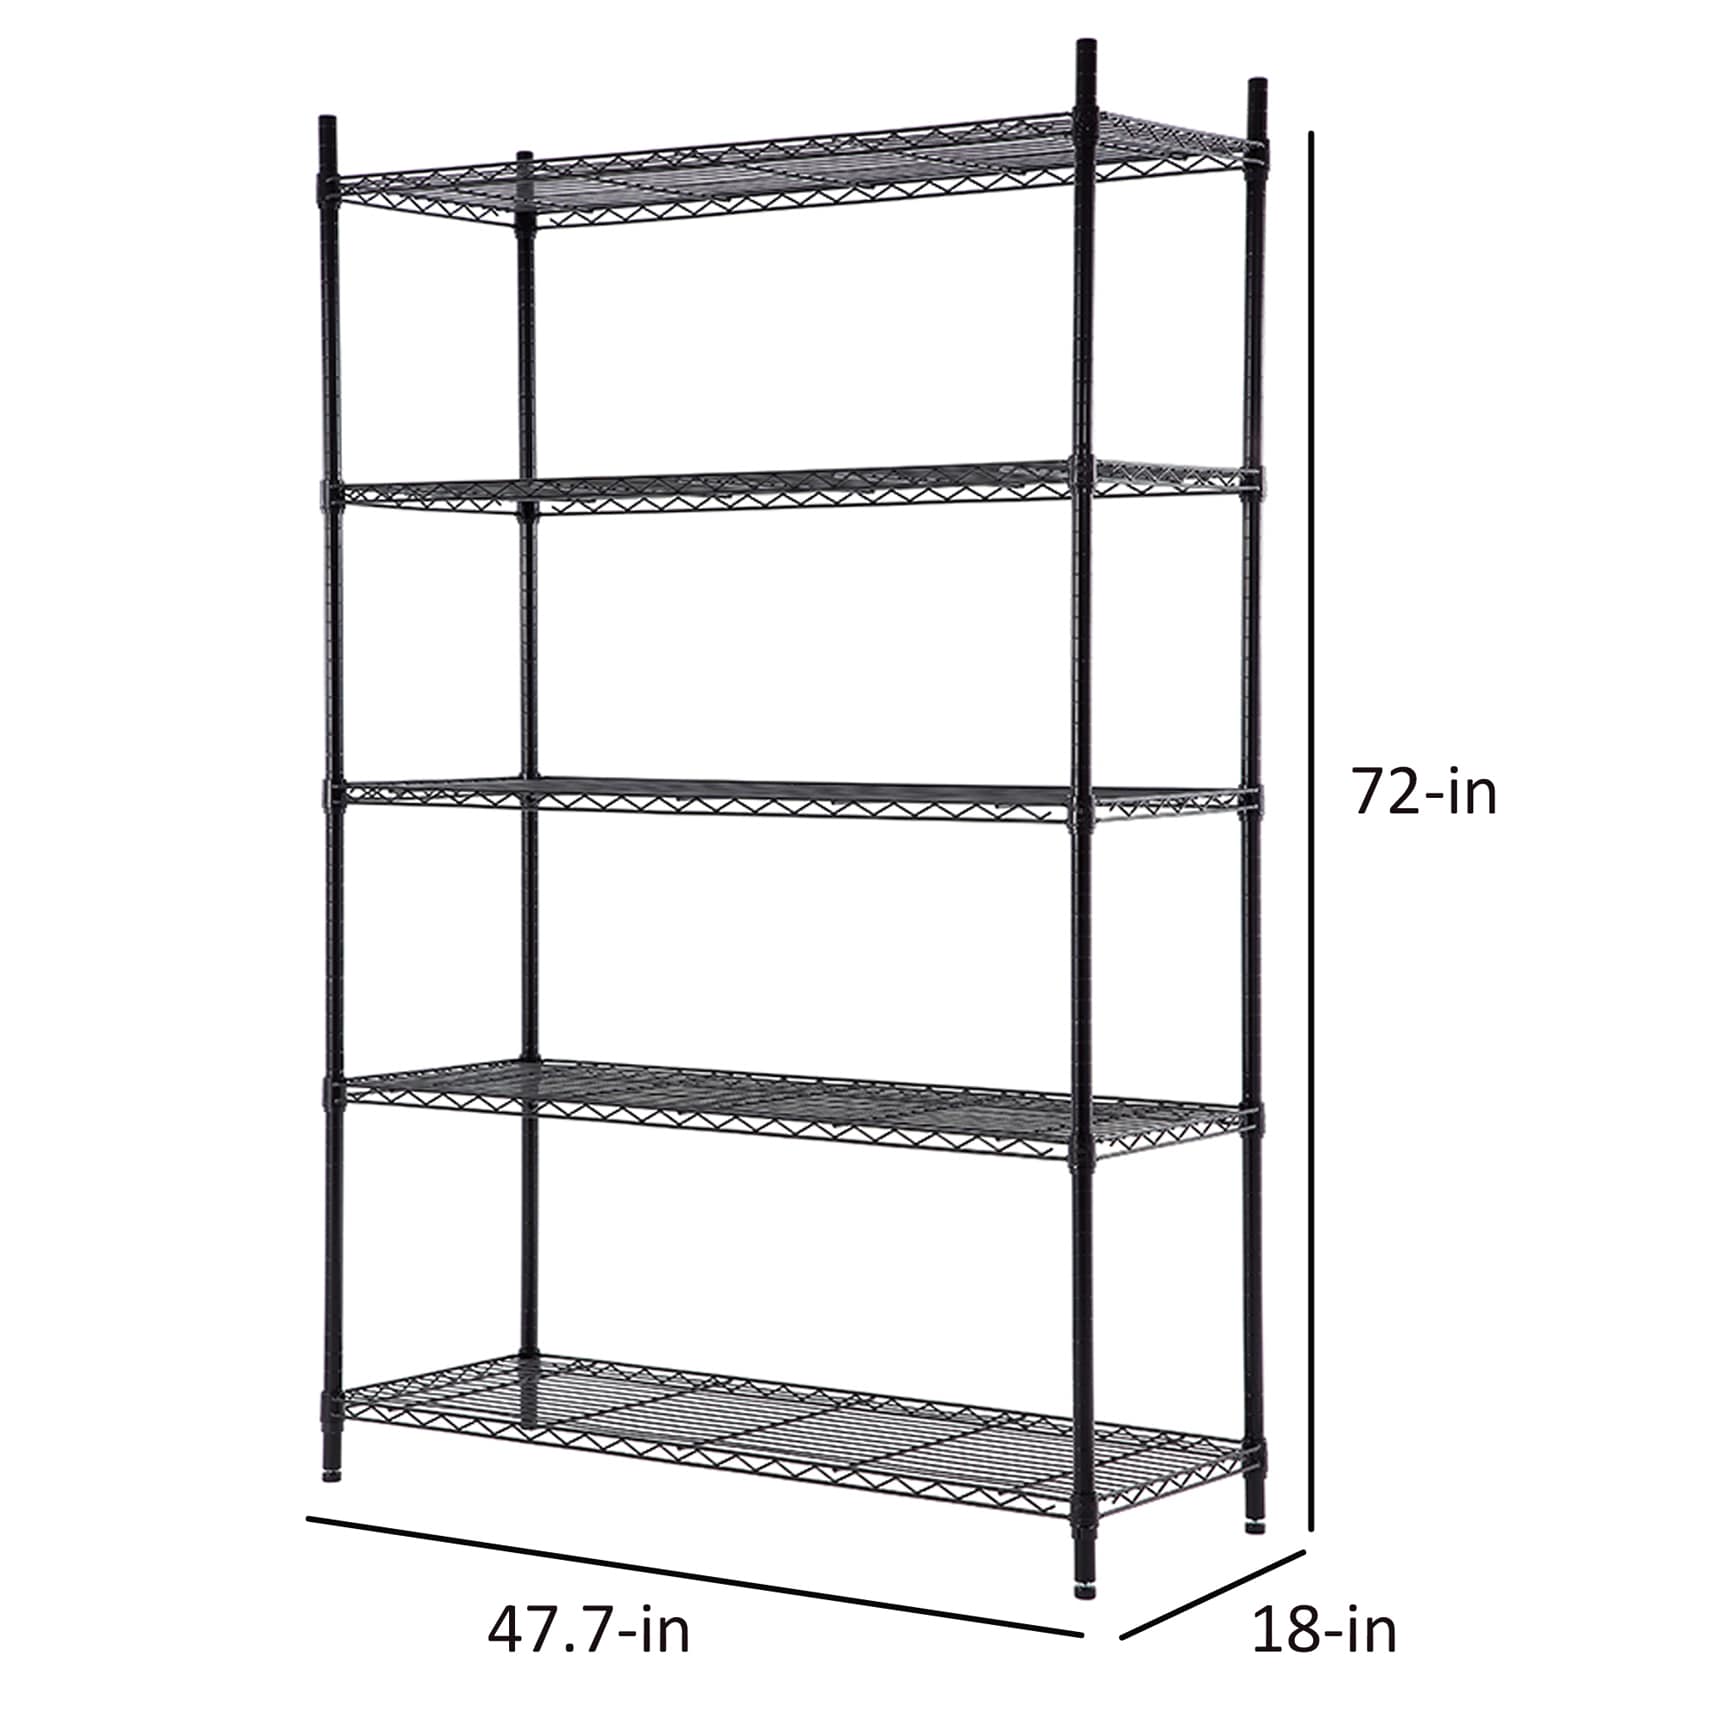 Craftsman 5-Tier Shelving Unit Only $49.98 Shipped on Lowes.com (Regularly  $75)